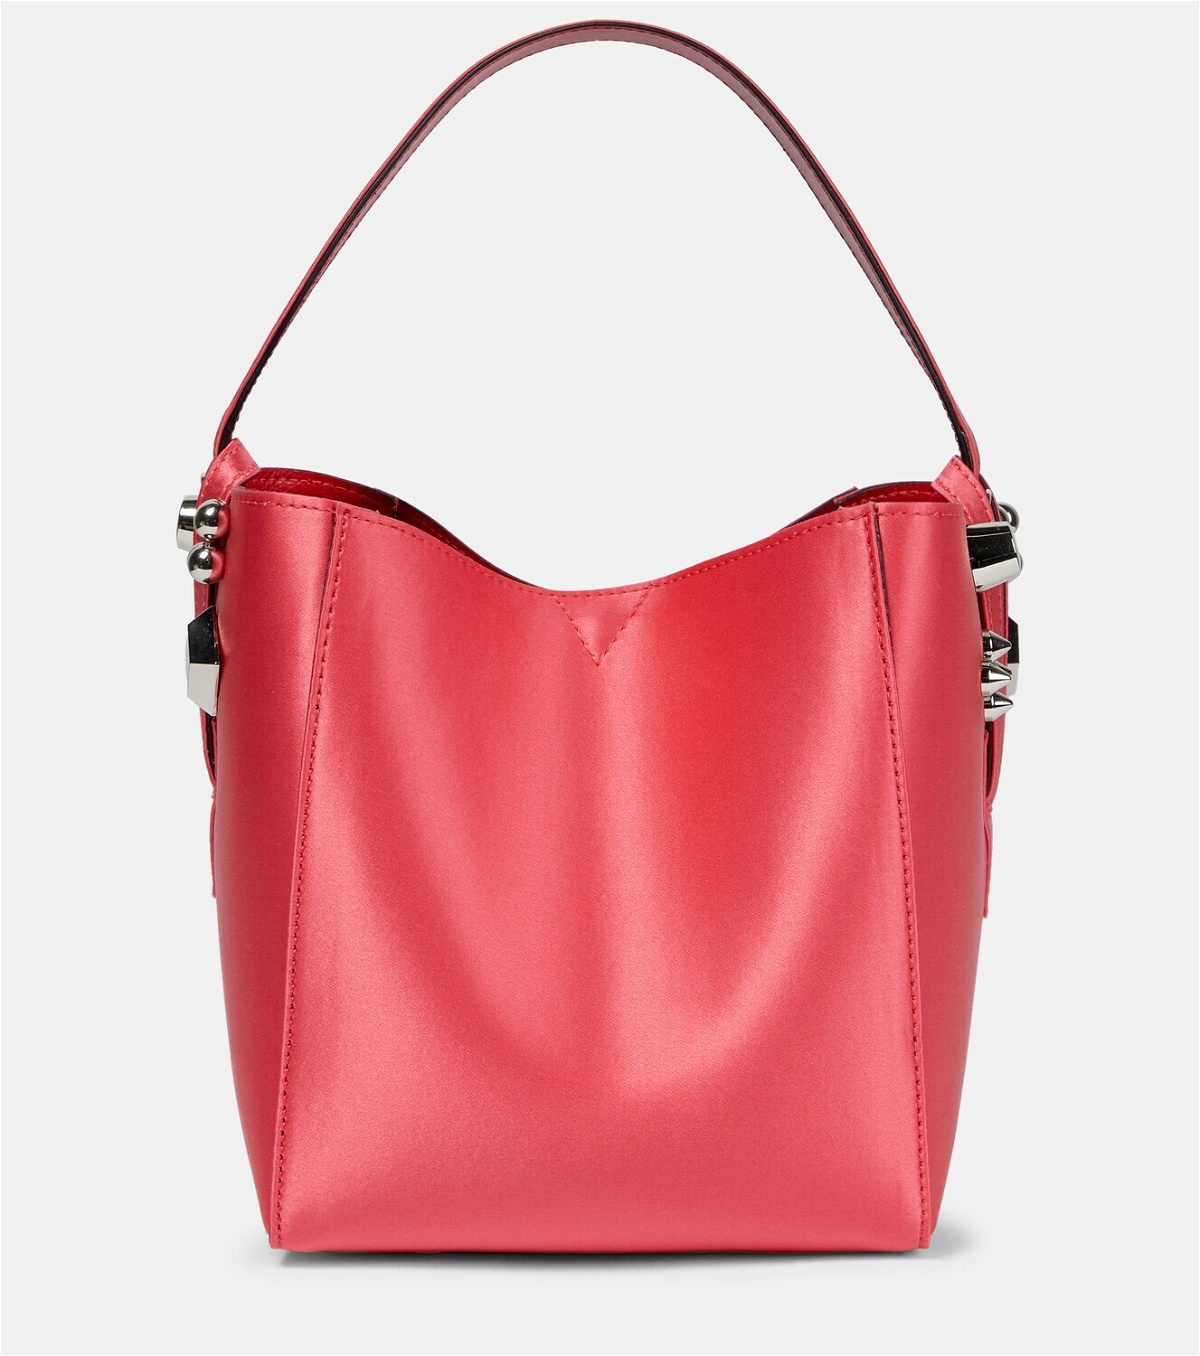 CHRISTIAN LOUBOUTIN: Cabata patent leather bag with discolaser print - Red